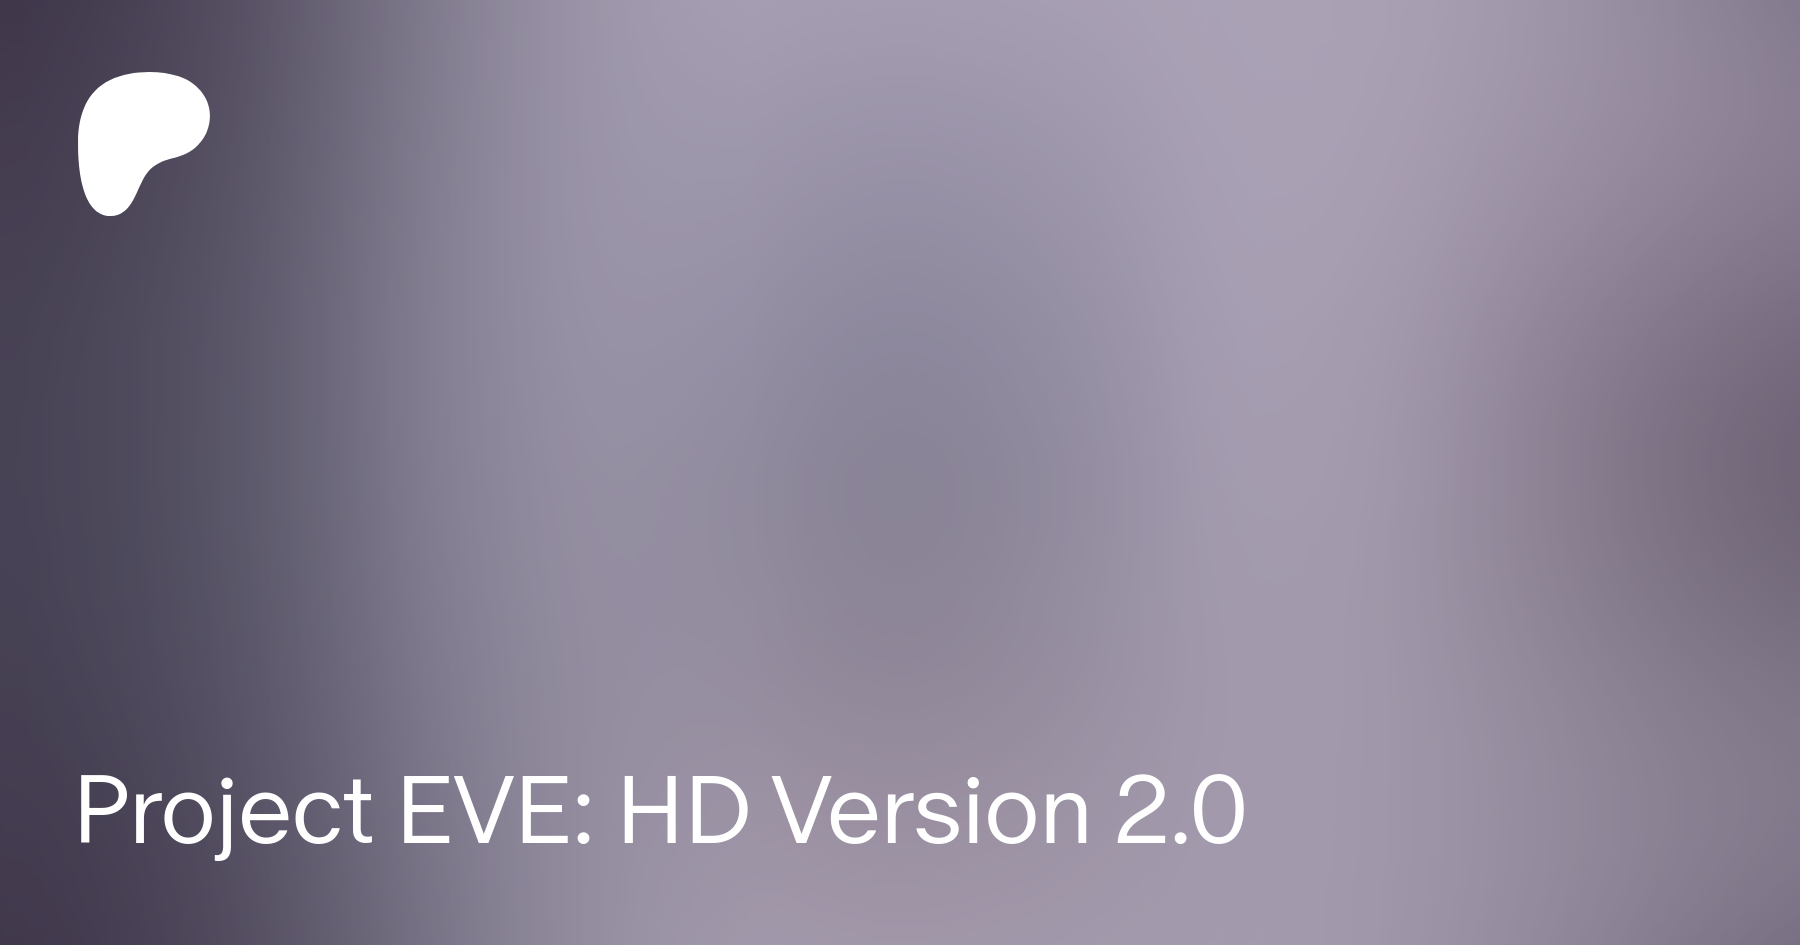 Project Evee v2